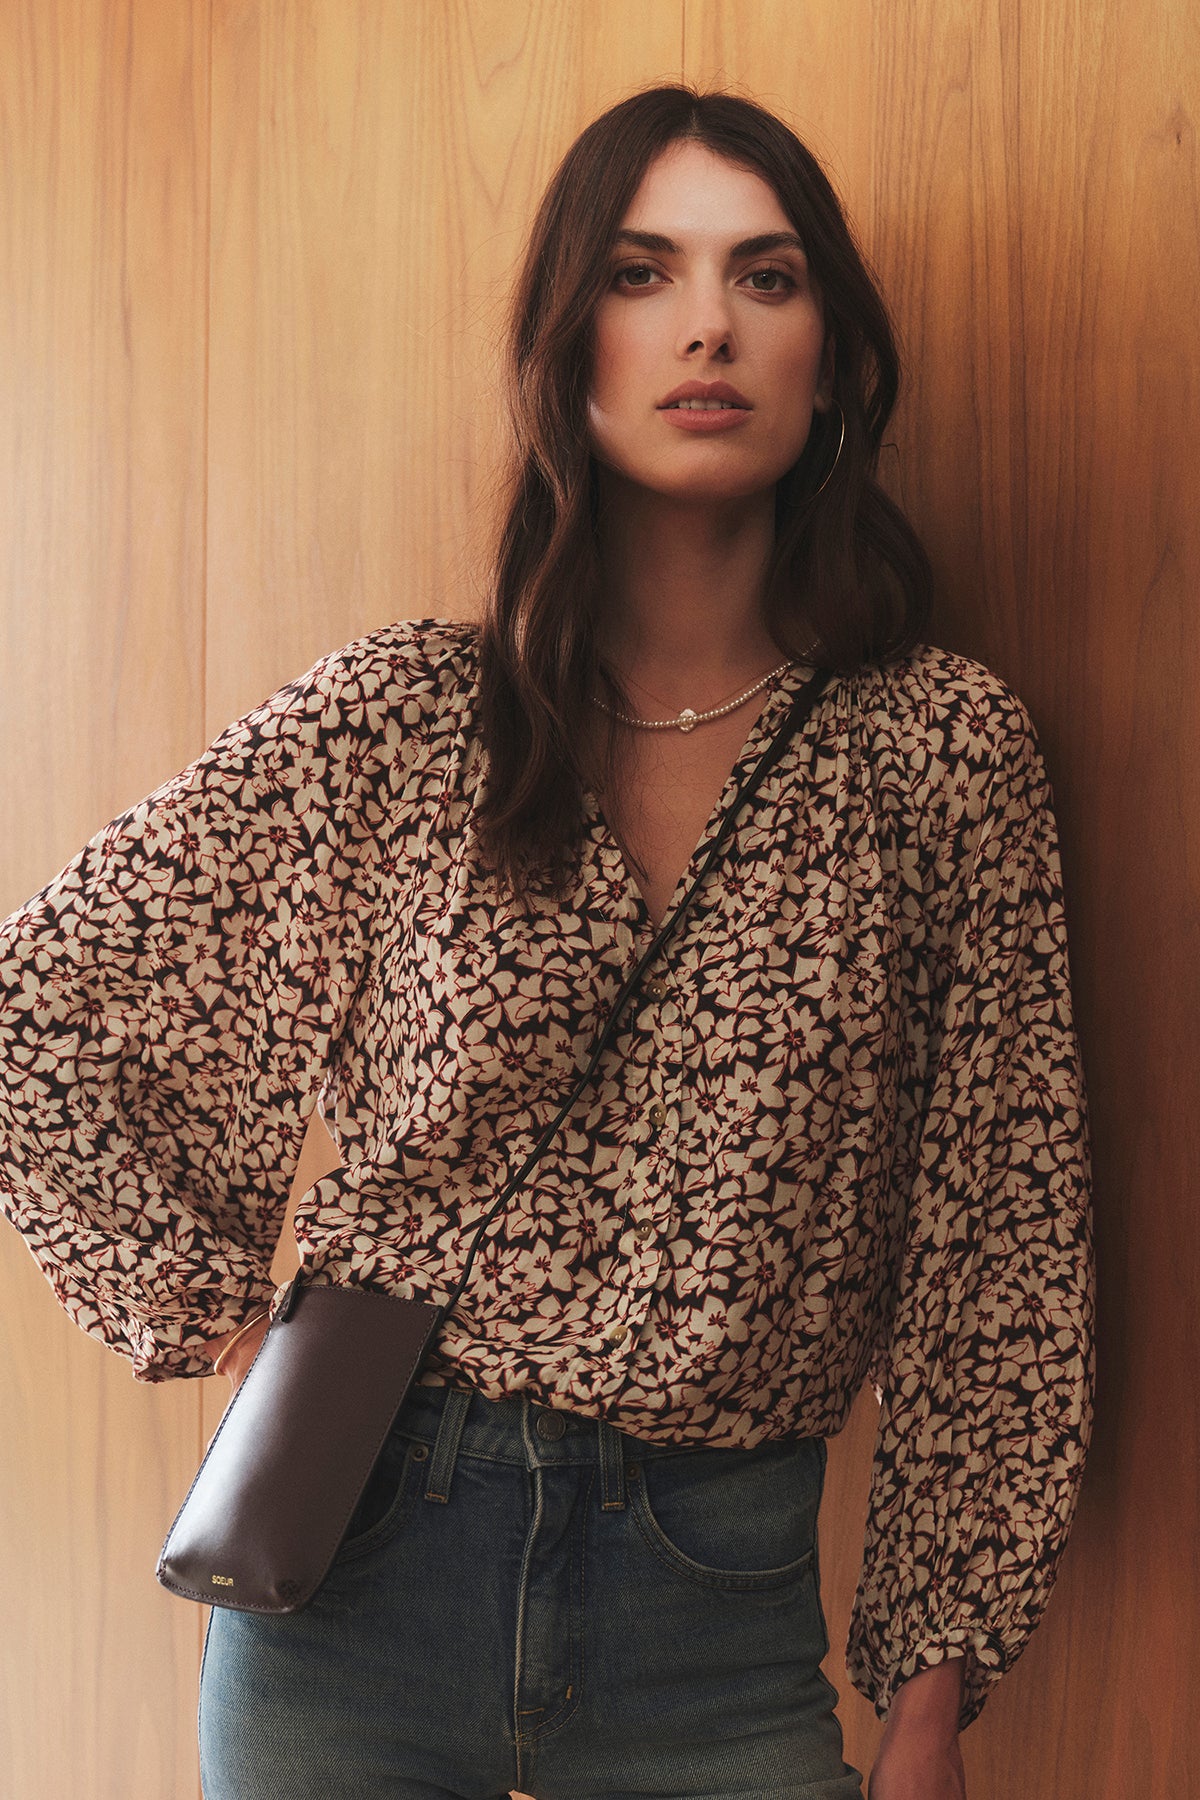   A stylish woman, representing the Soeur brand, wearing a blouse and jeans elegantly leans against a wall with the NOE Bag by Soeur in hand. 